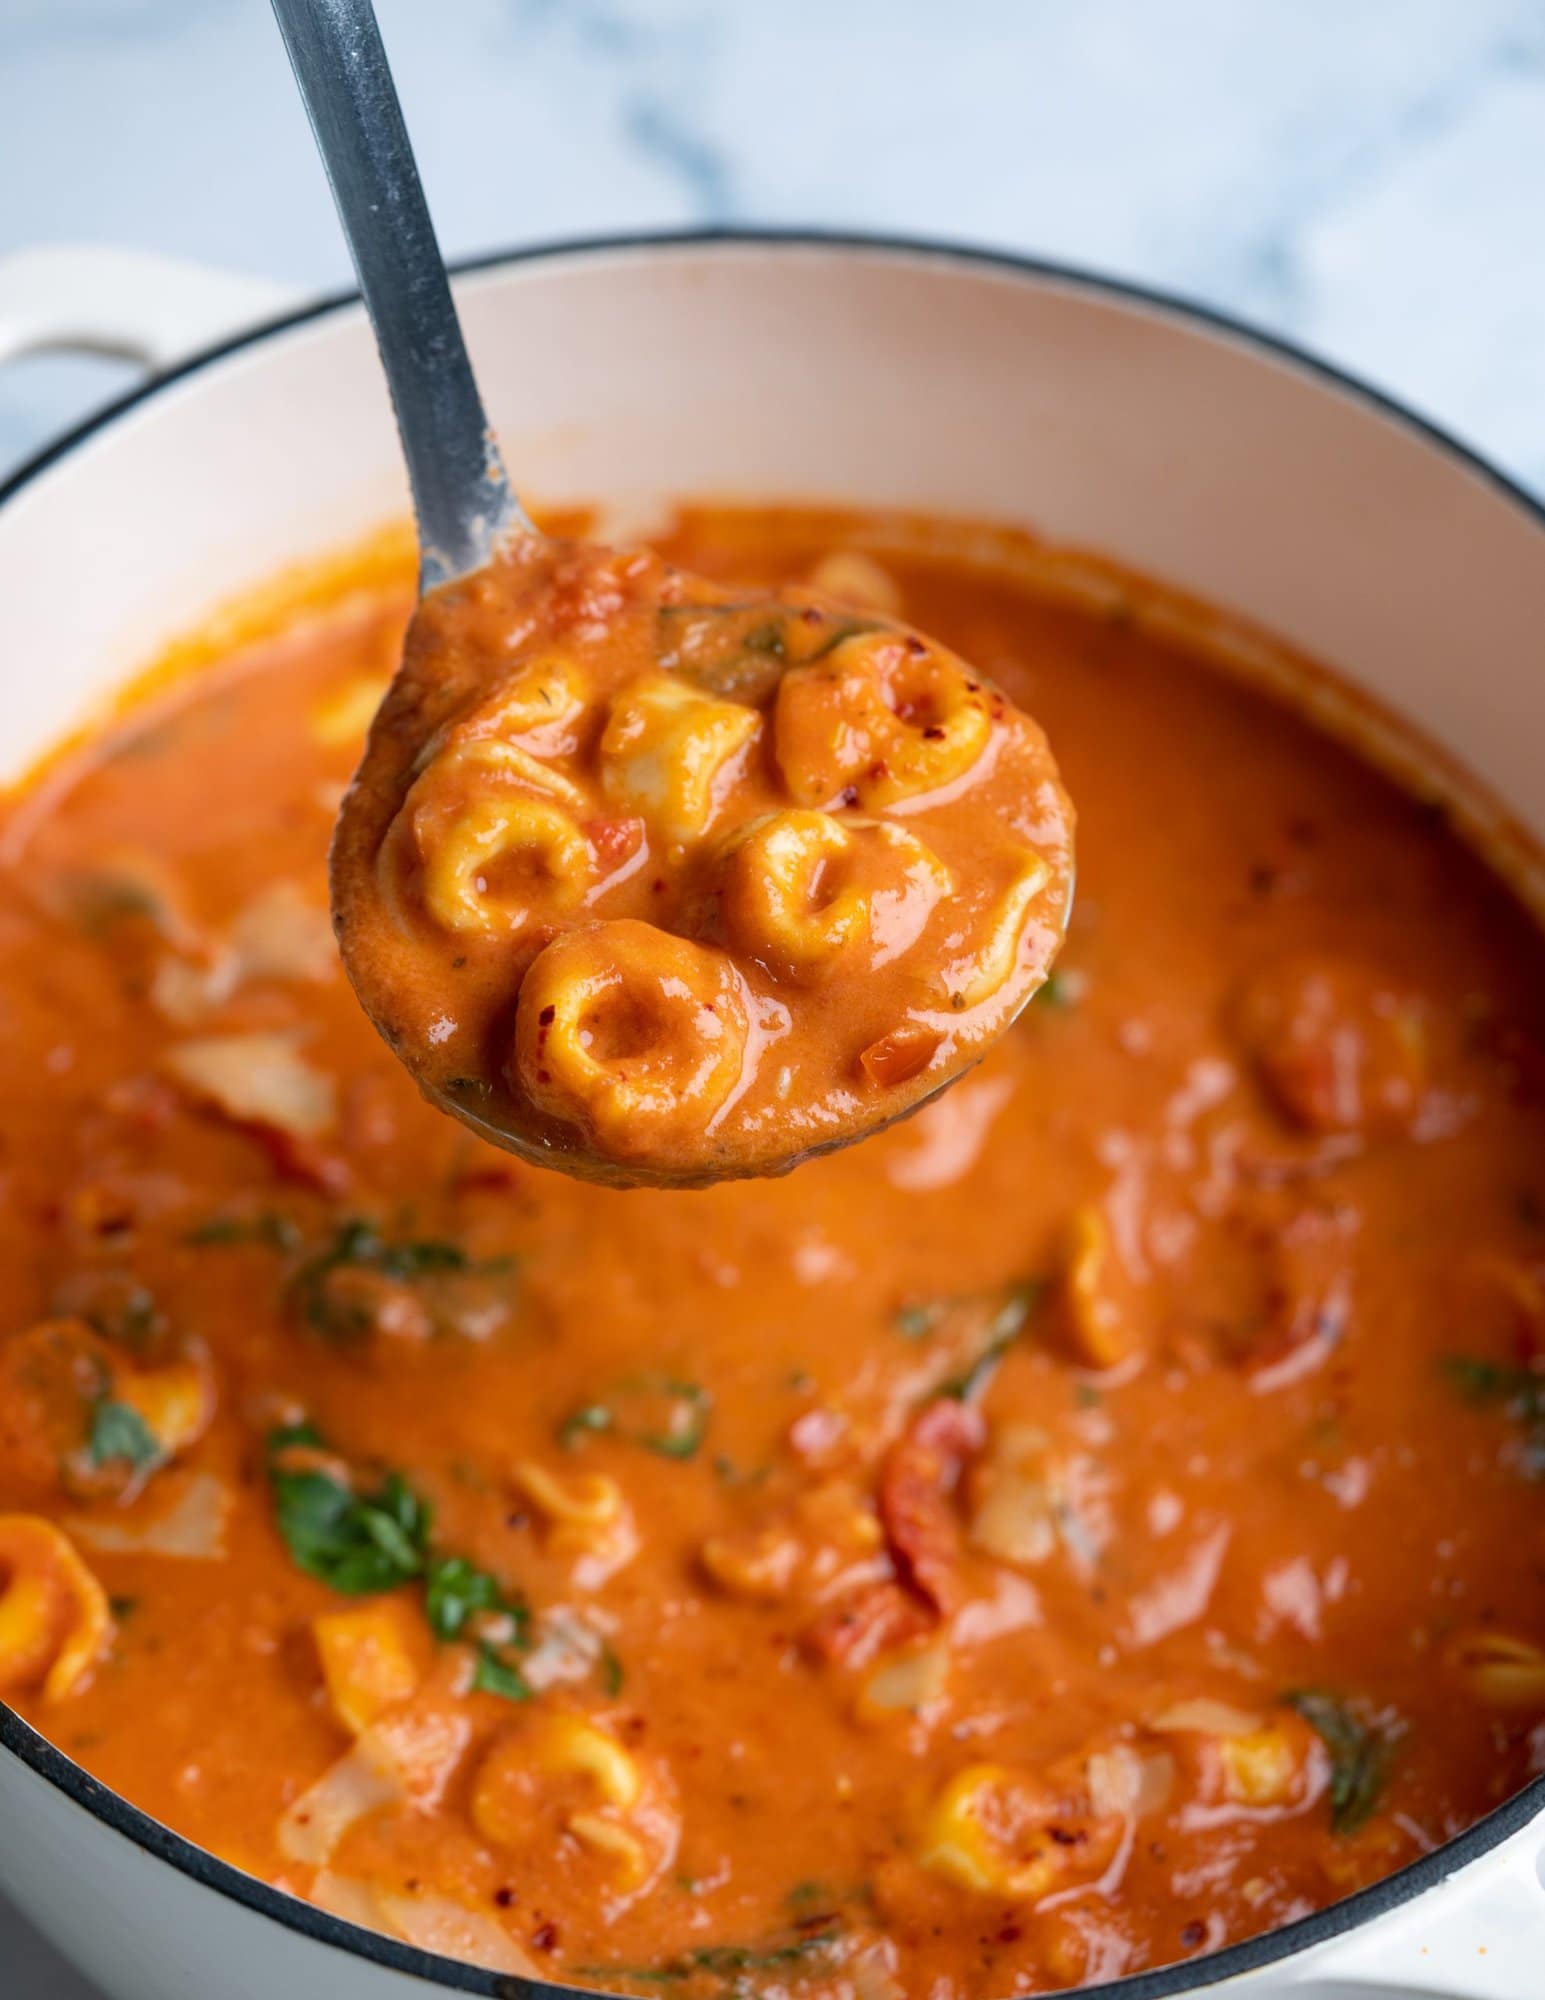 Tortellini pasta in a creamy, cheesy and tangy tomato soup, made in a dutch oven. A ladleful of soup shown in the image.